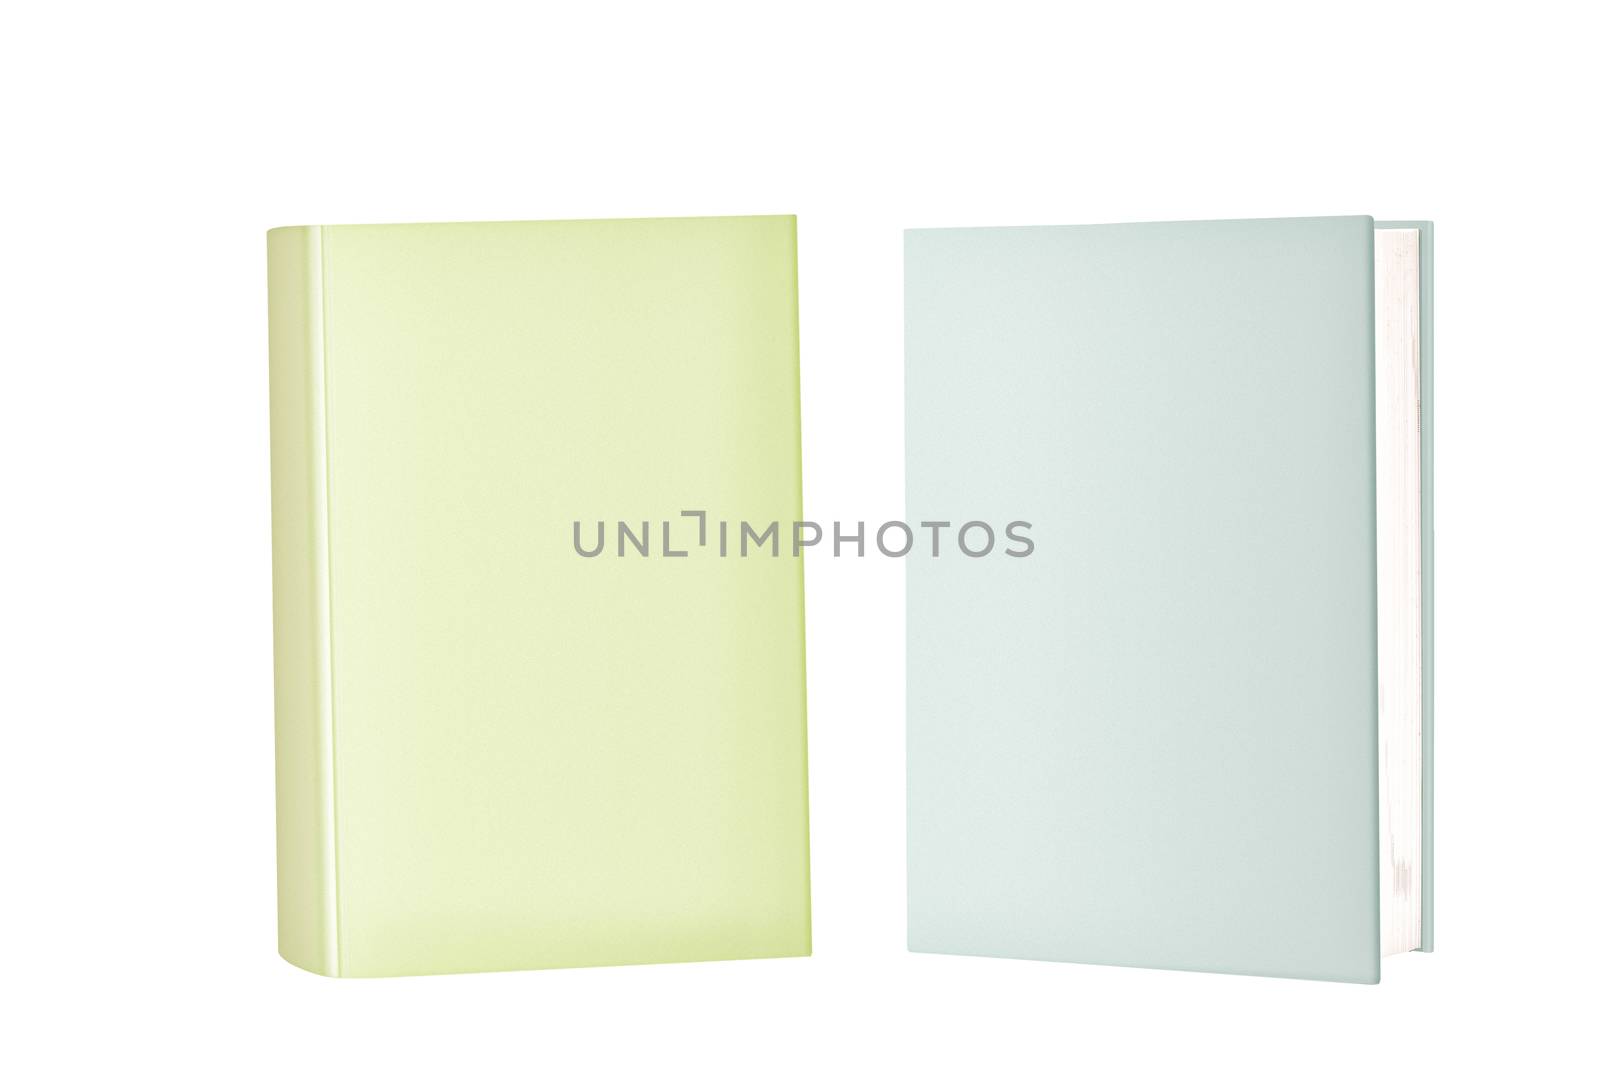 Two books standing on end on a white background.  One light green and one light blue.